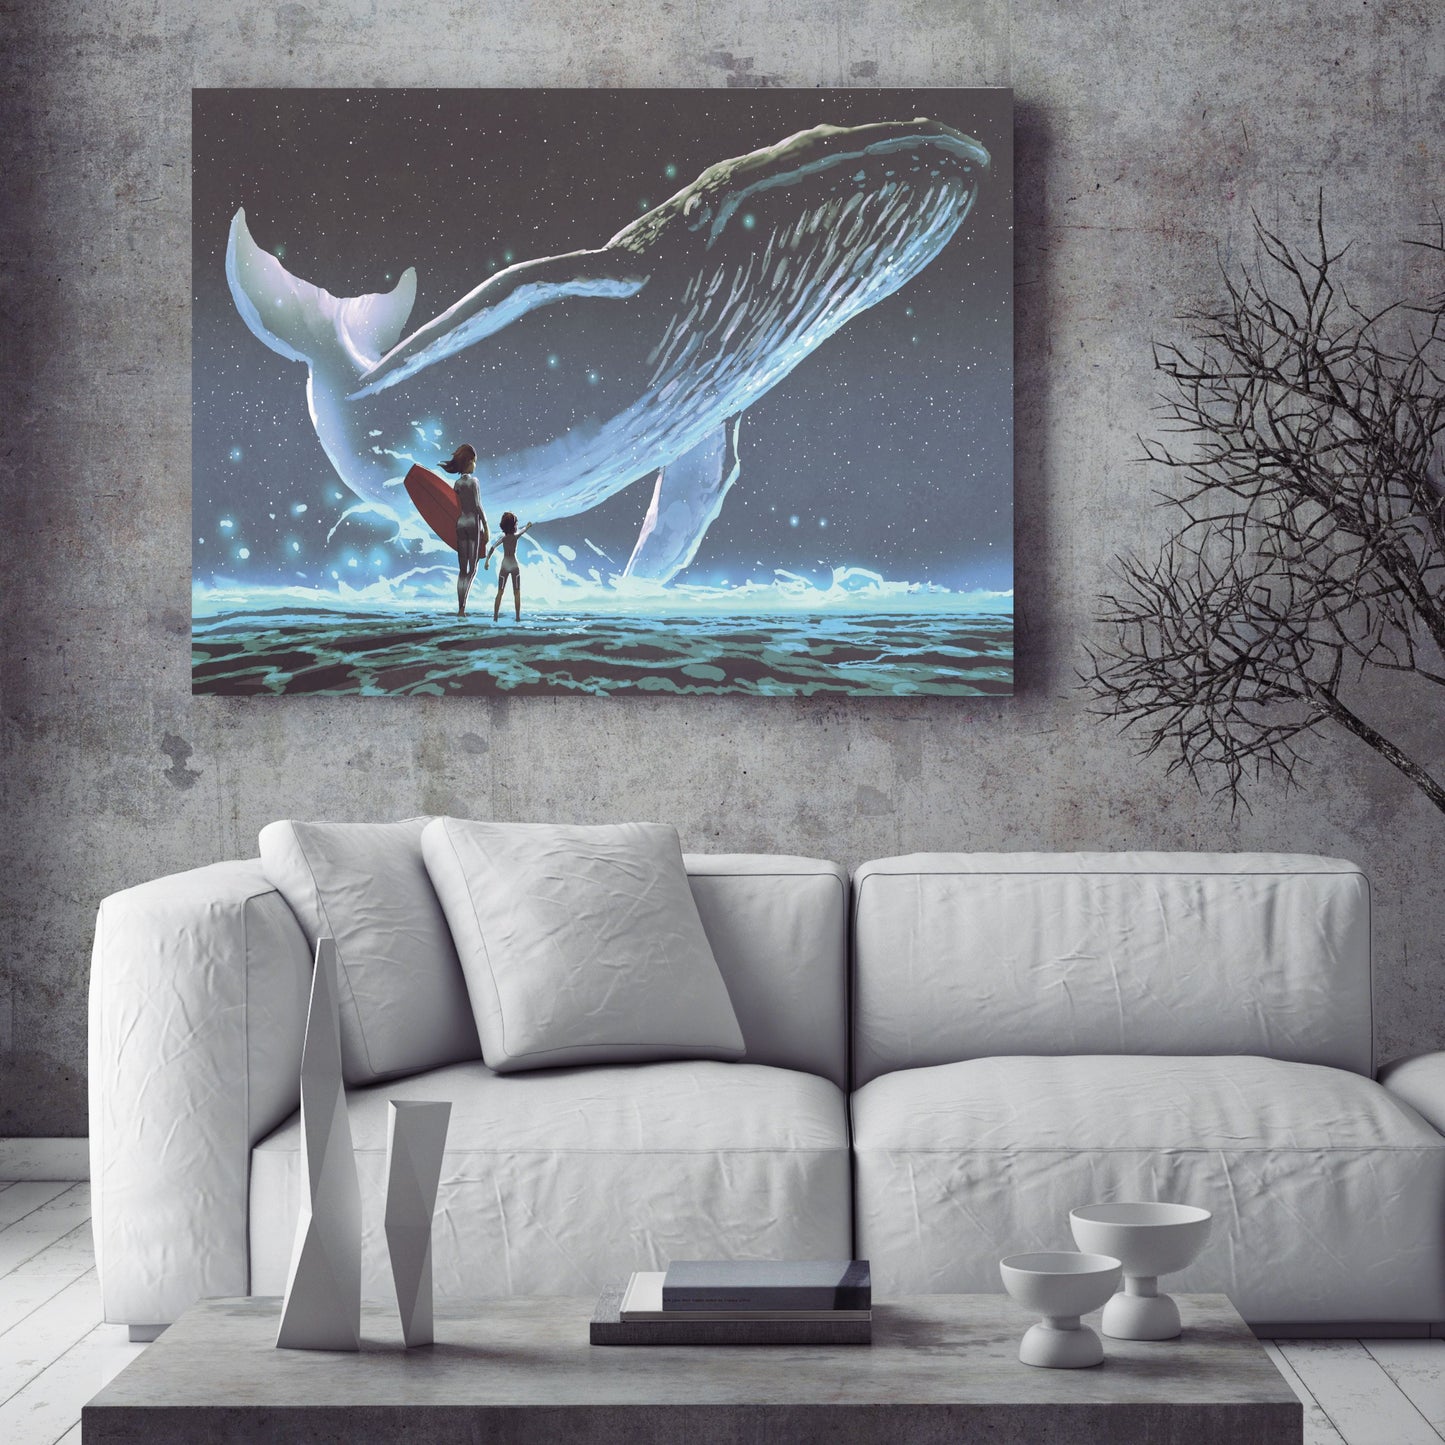 Mother and daughter looking at the whale with blue light flying in the night sky